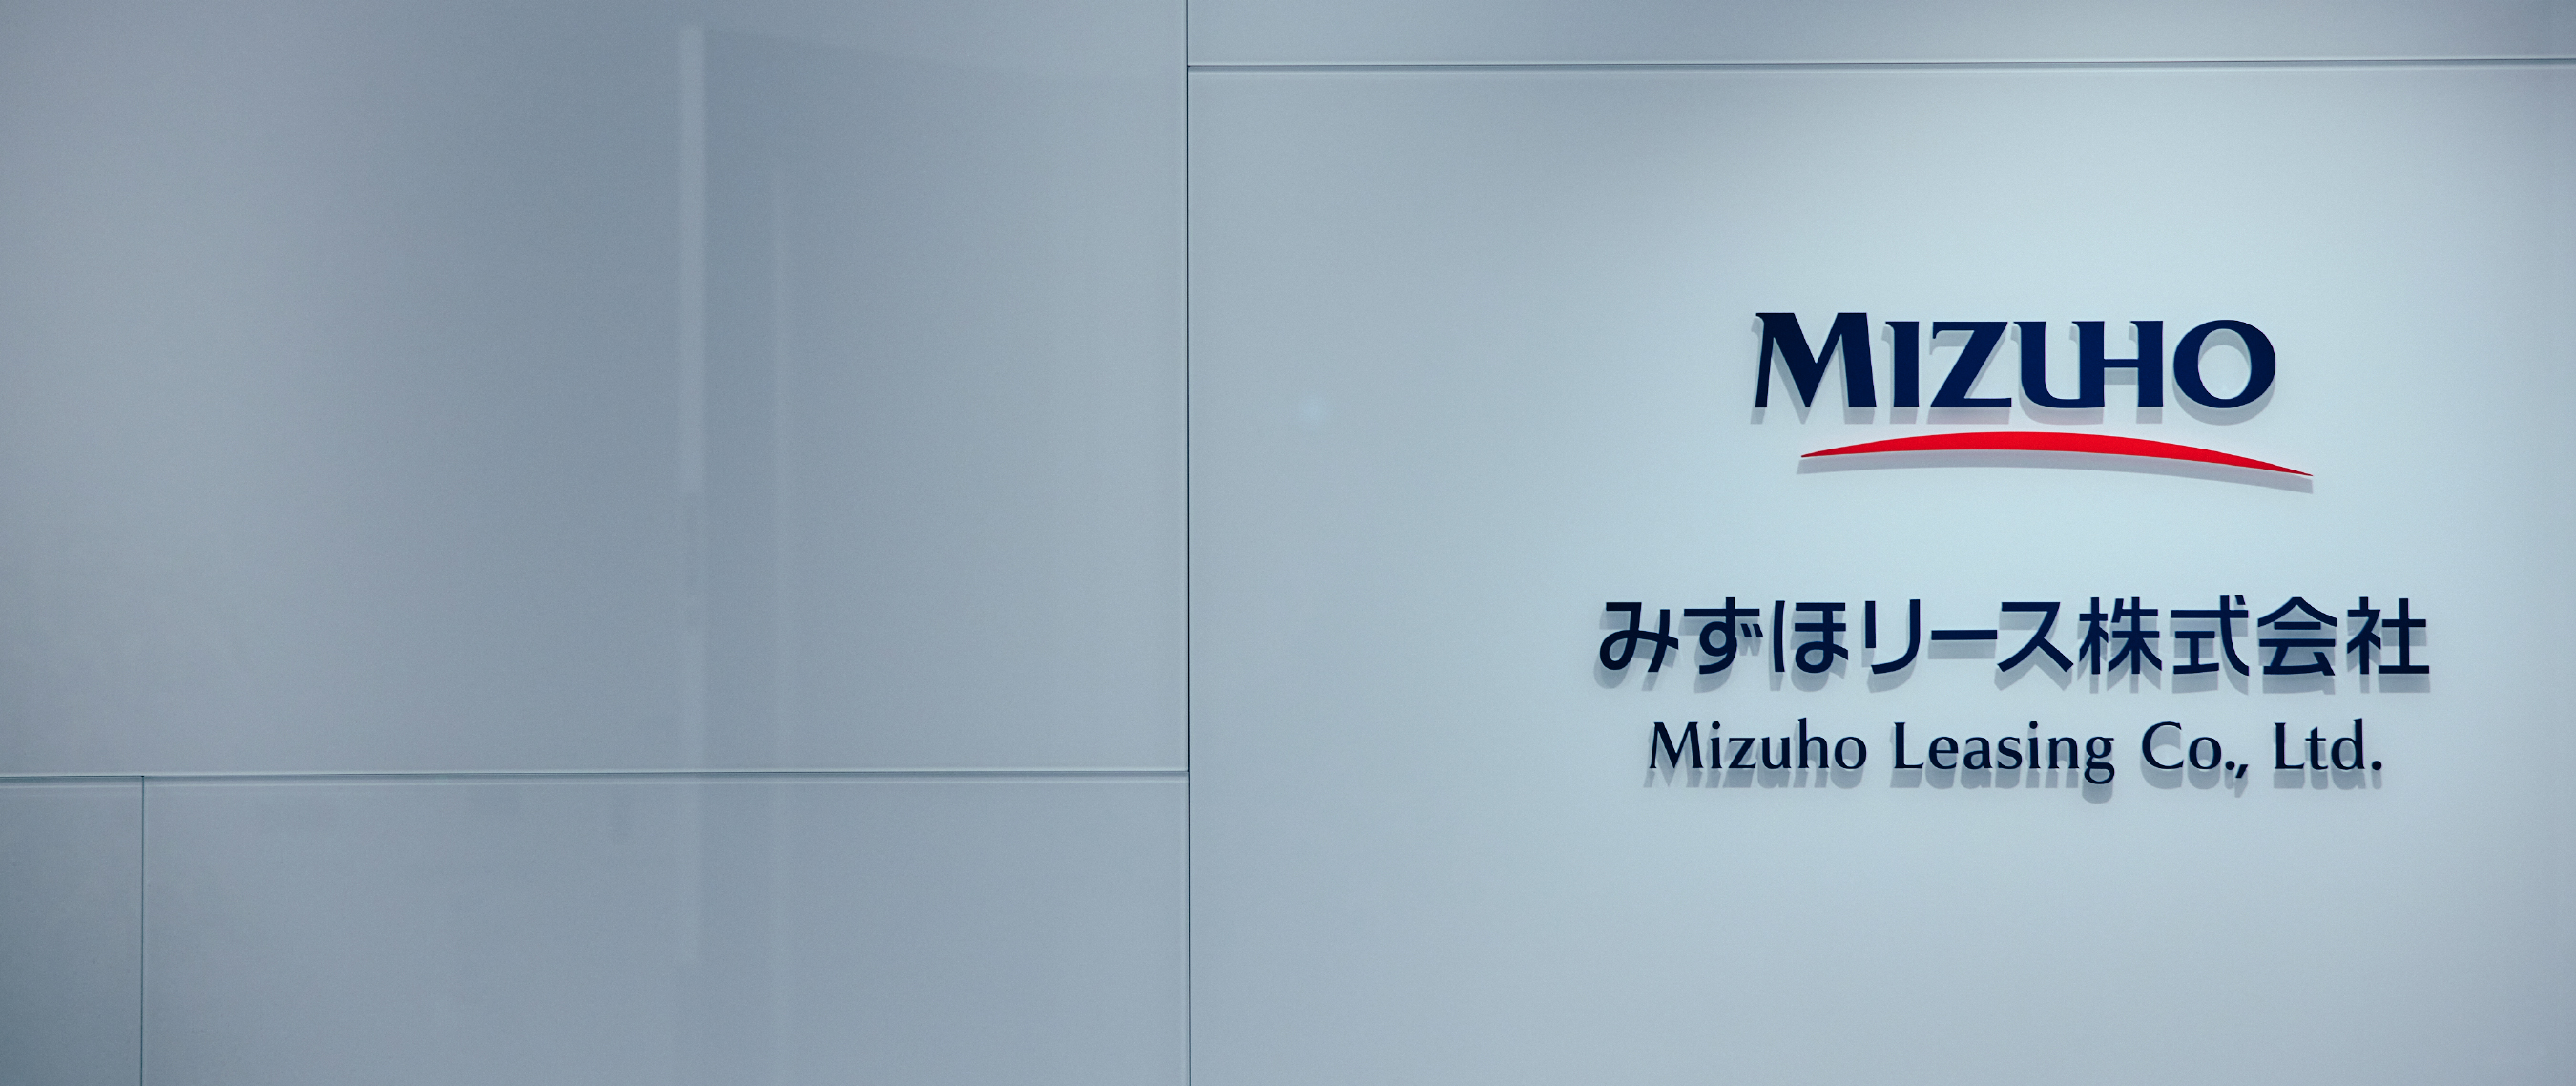 ABOUT MIZUHO LEASING